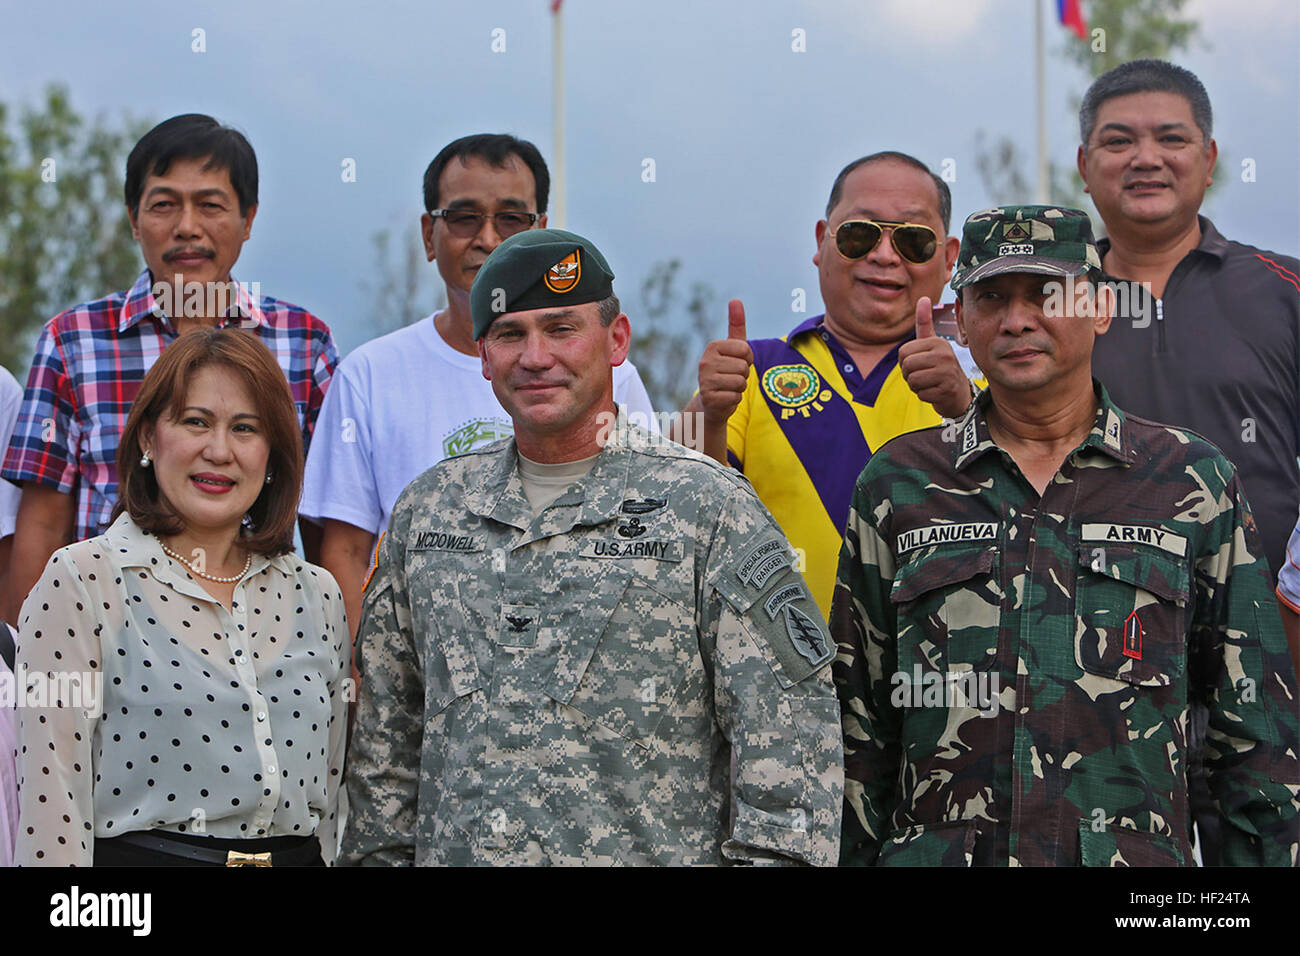 Philippine Army Col. Ronald Villanueva, right, chief-of-staff of 7th Infantry Division, and U.S. Army Col. Robert McDowell, center, commanding officer of Joint Special Operations Task Force - Philippines, meet Carolina Dg Uy, left, provincial tourism officer of Nueva Ecija, after a wreath-laying ceremony May 10 at the Pangatian War Memorial in Cabanatuan, N.E., Philippines, during exercise Balikatan 2014. The ceremony honored Philippine and U.S. soldiers interred at the Cabanatuan Prison Camp, some of whom were liberated by Philippine guerrillas and the U.S. Army's 6th Ranger Battalion during  Stock Photo